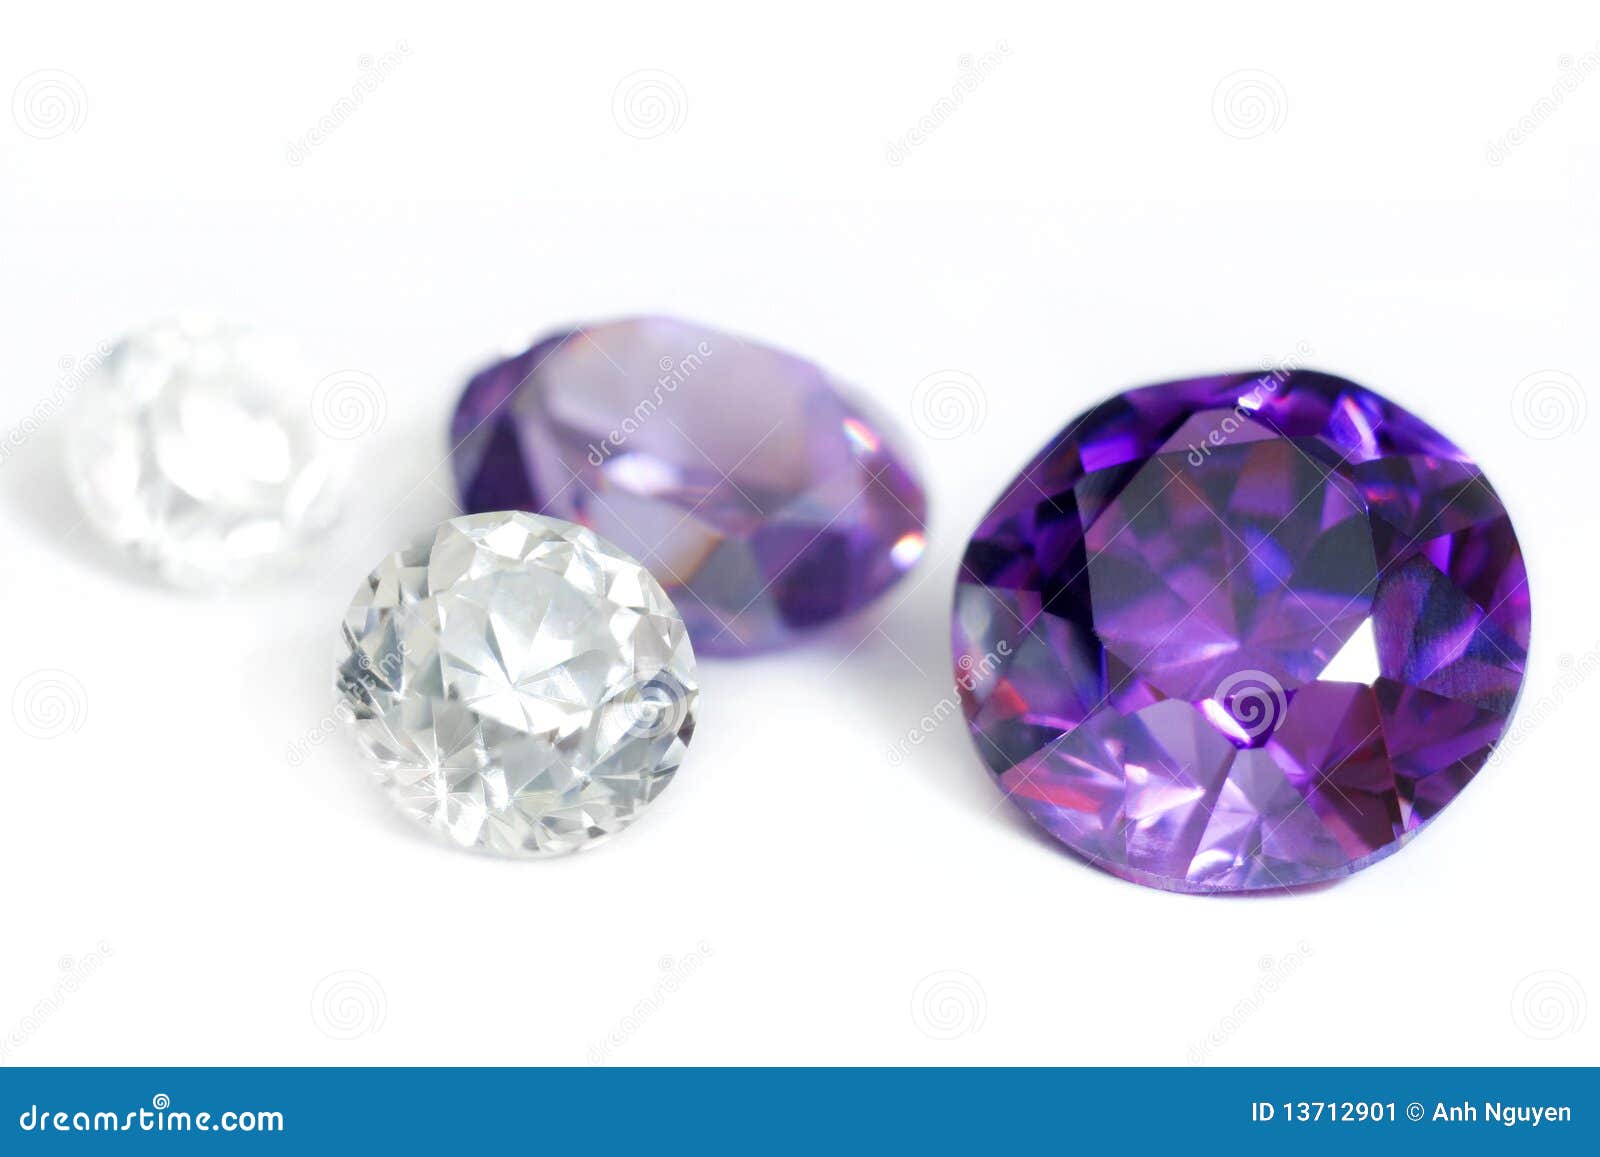 purple and colorless gemstones close-up